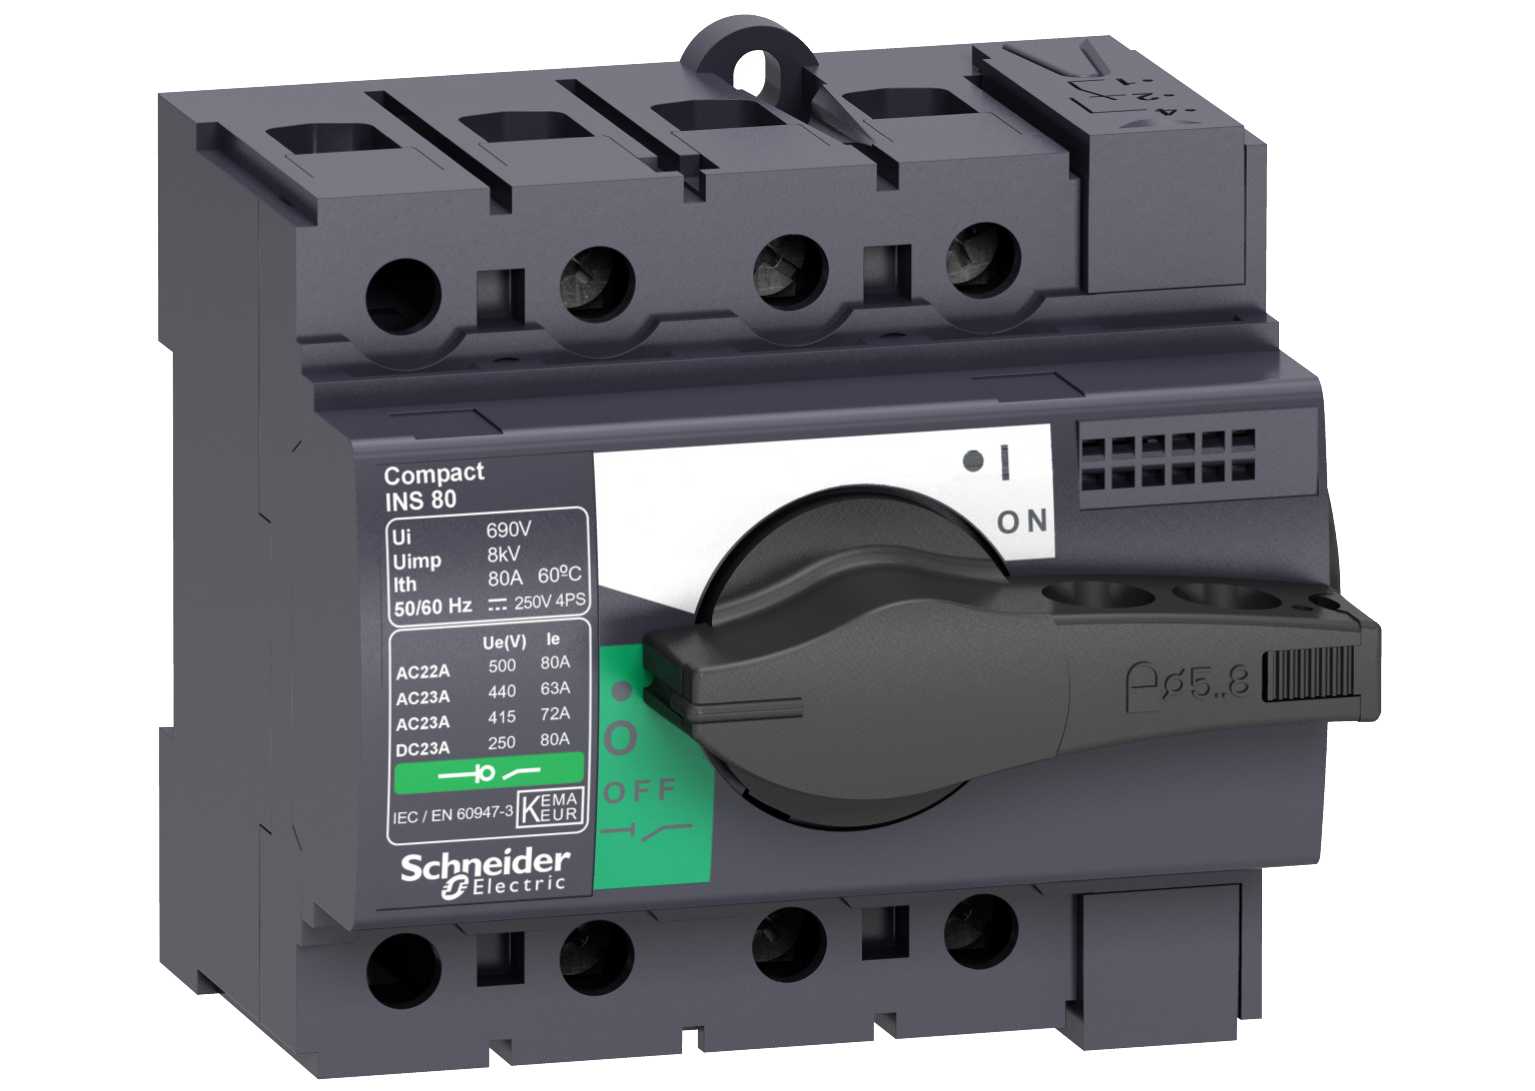 Schneider Electric - LASTBRYTER INS80 3P.  28904  INTERPACT 80A